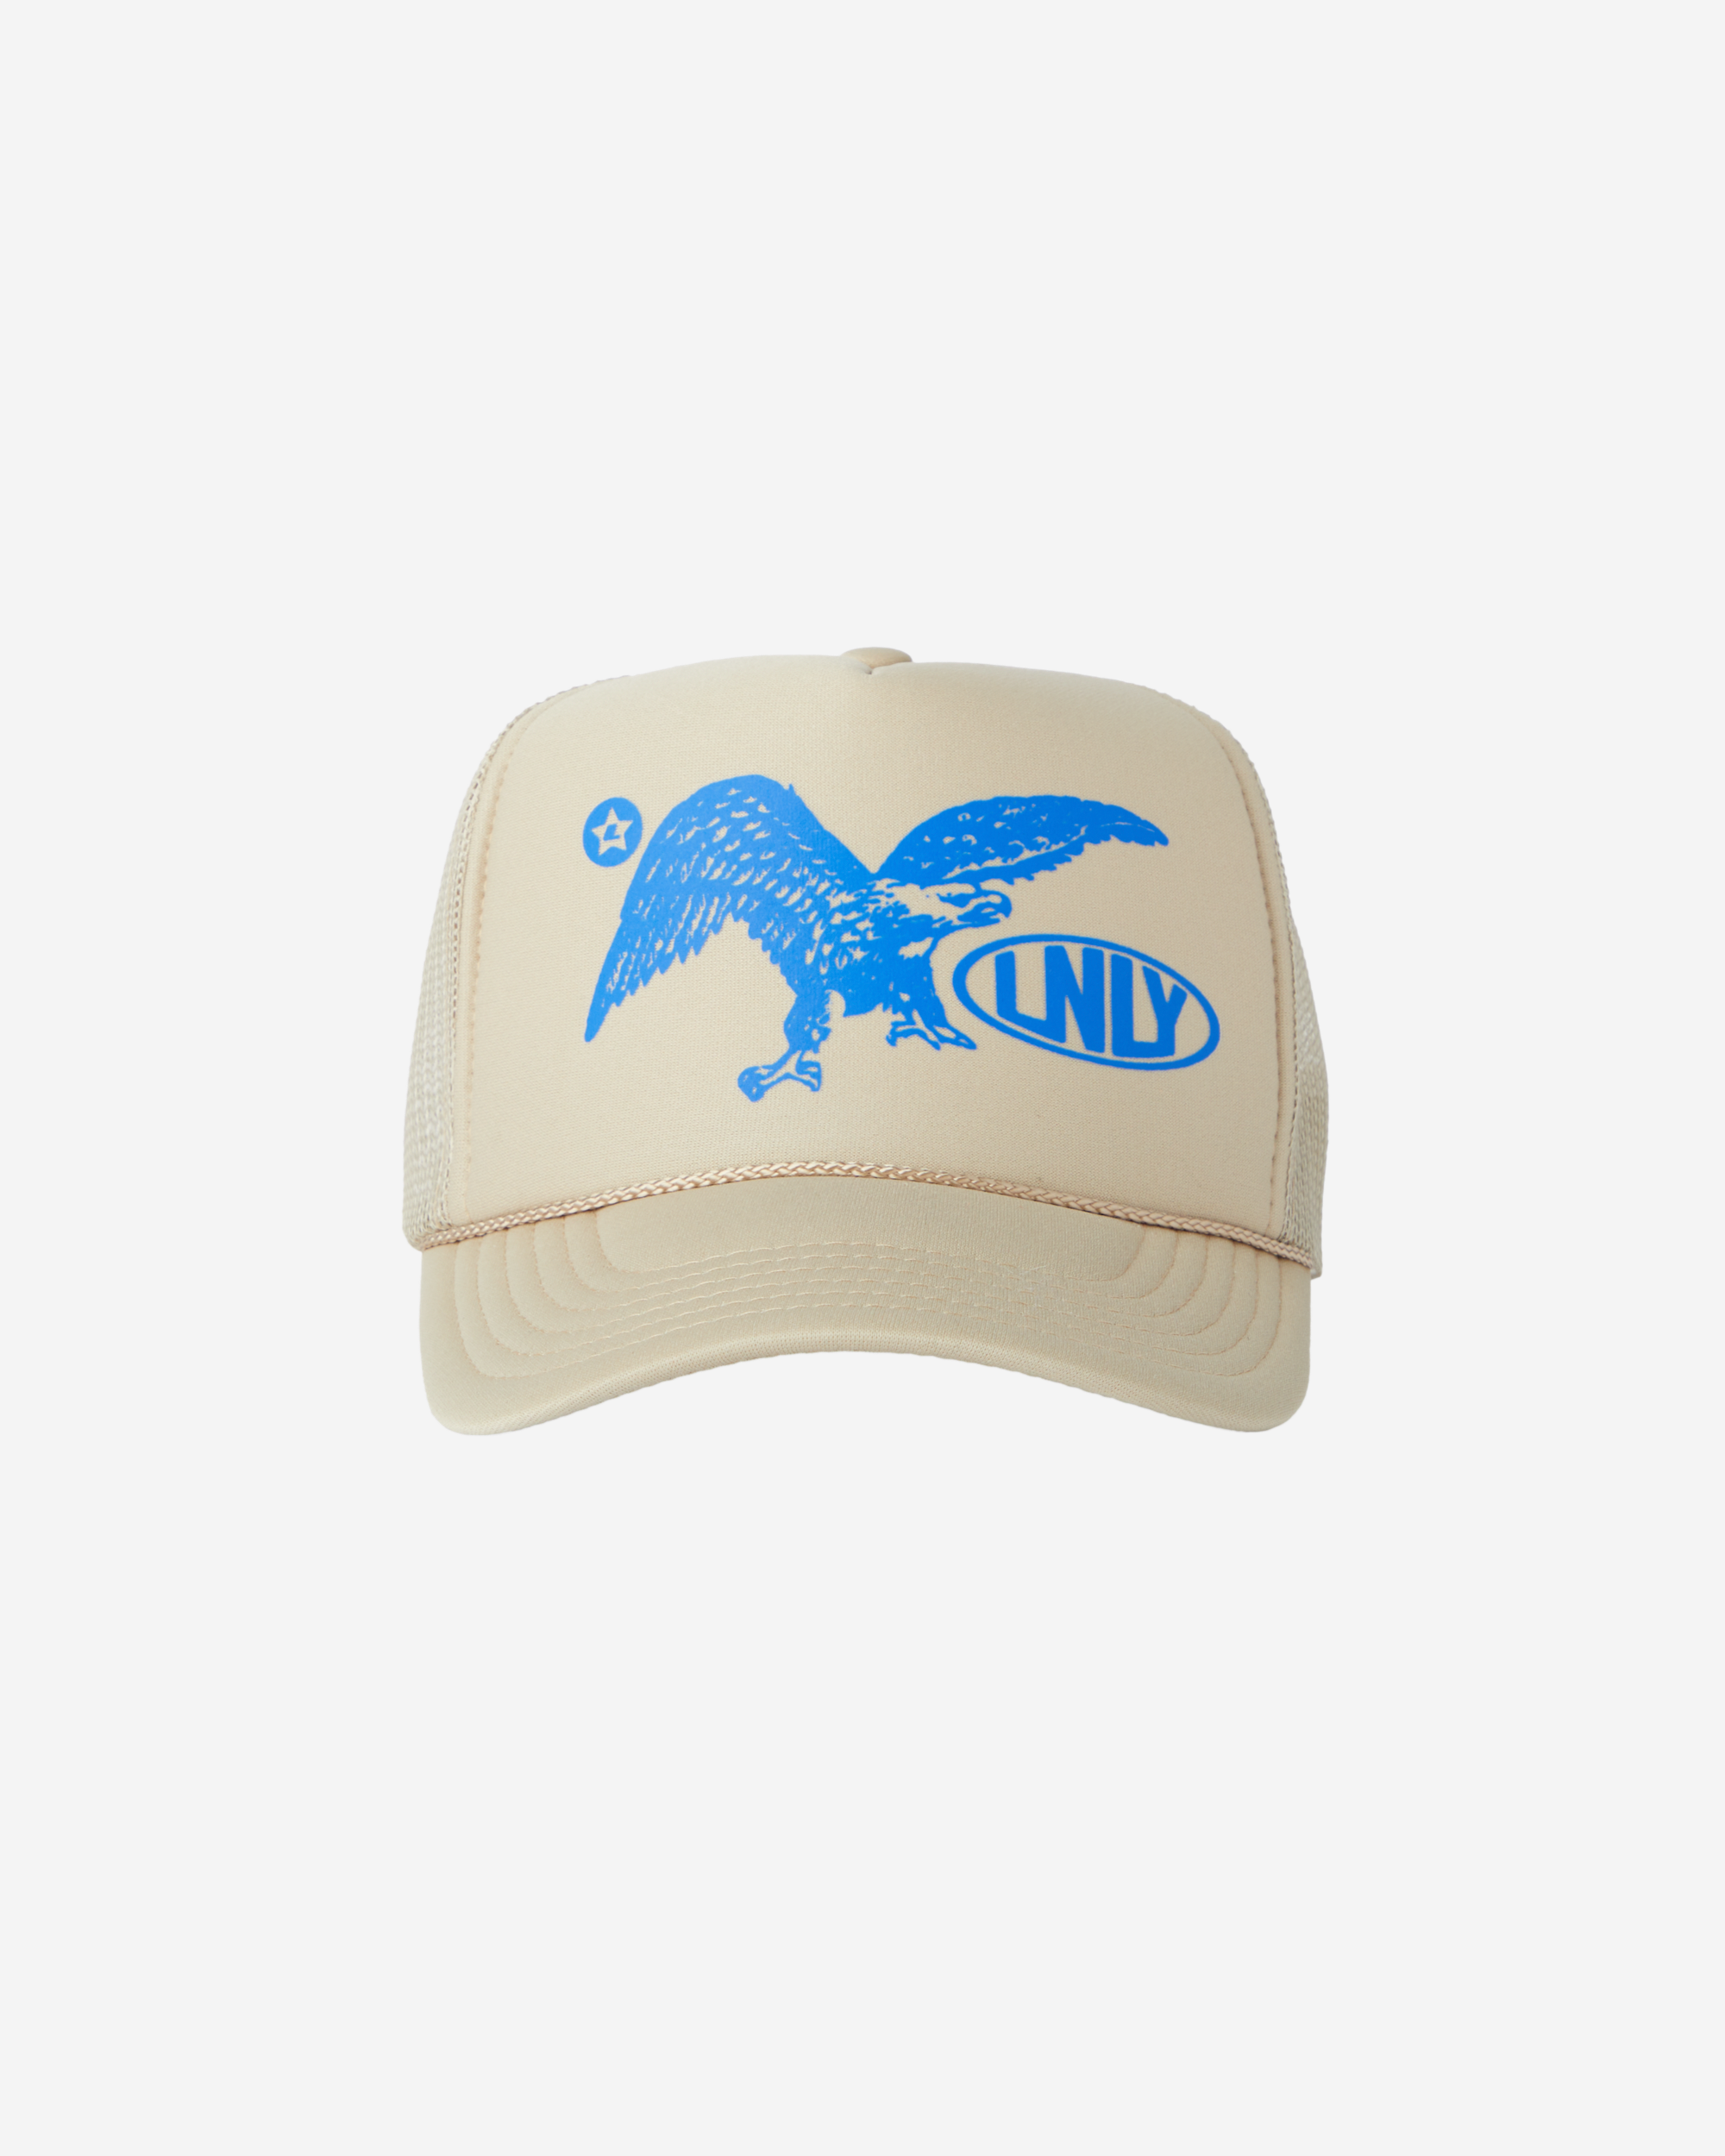 Lonely Road Eagle Trucker Hat